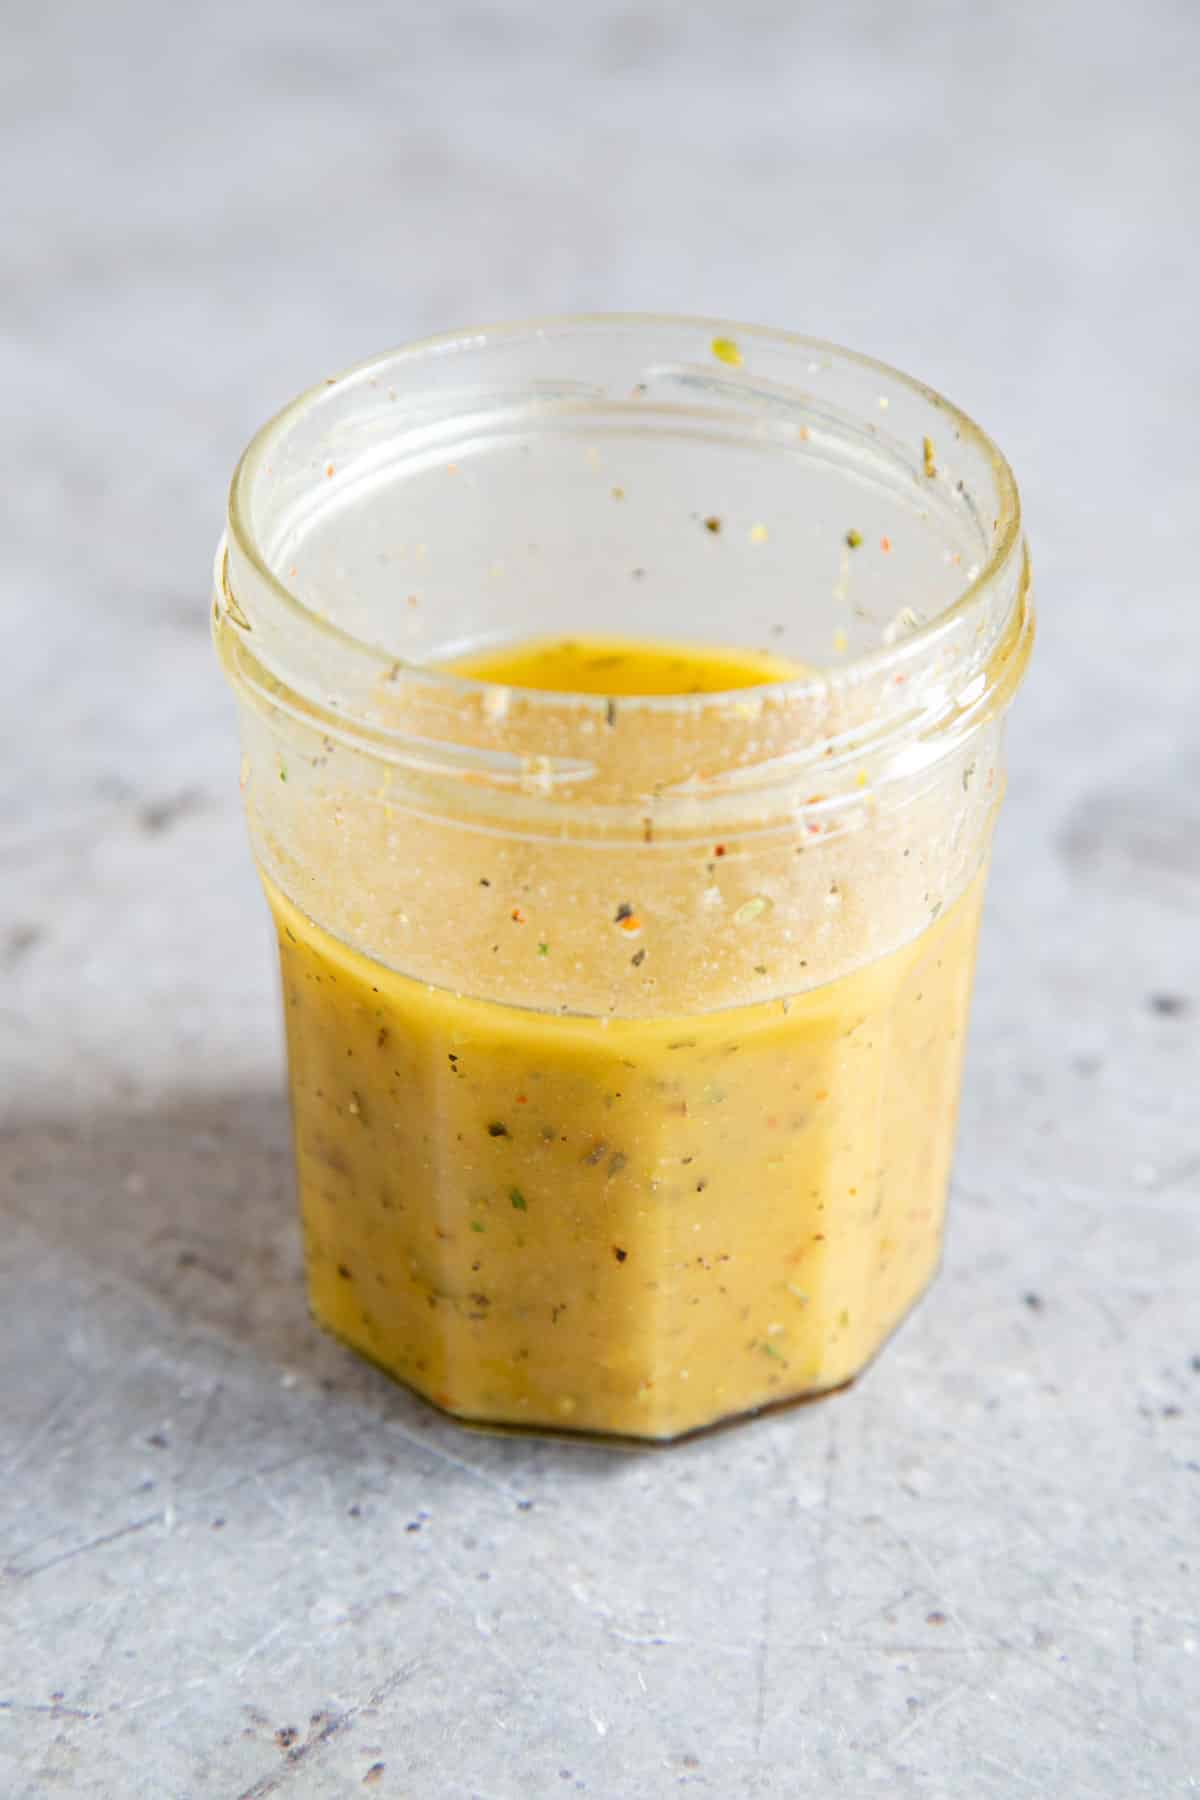 The emulsified dressing in a jar, golden in colour and flecked with chilli flake and herbs.